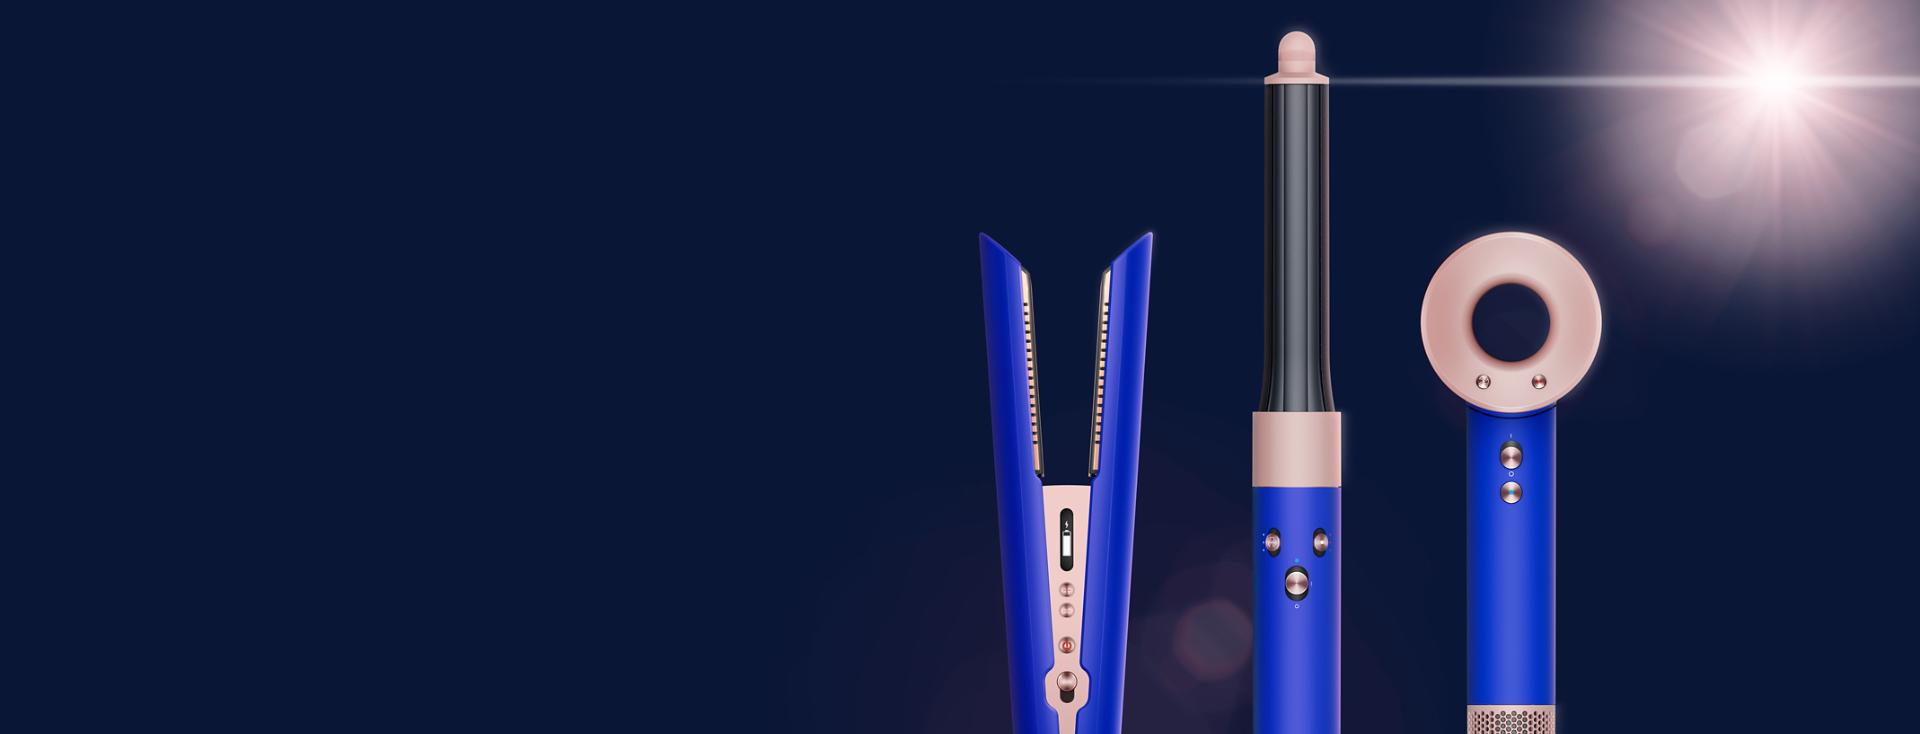 Dyson Corrale hair straightener, Dyson Airwrap multi-styler and Dyson Supersonic hair dryer in blue blush